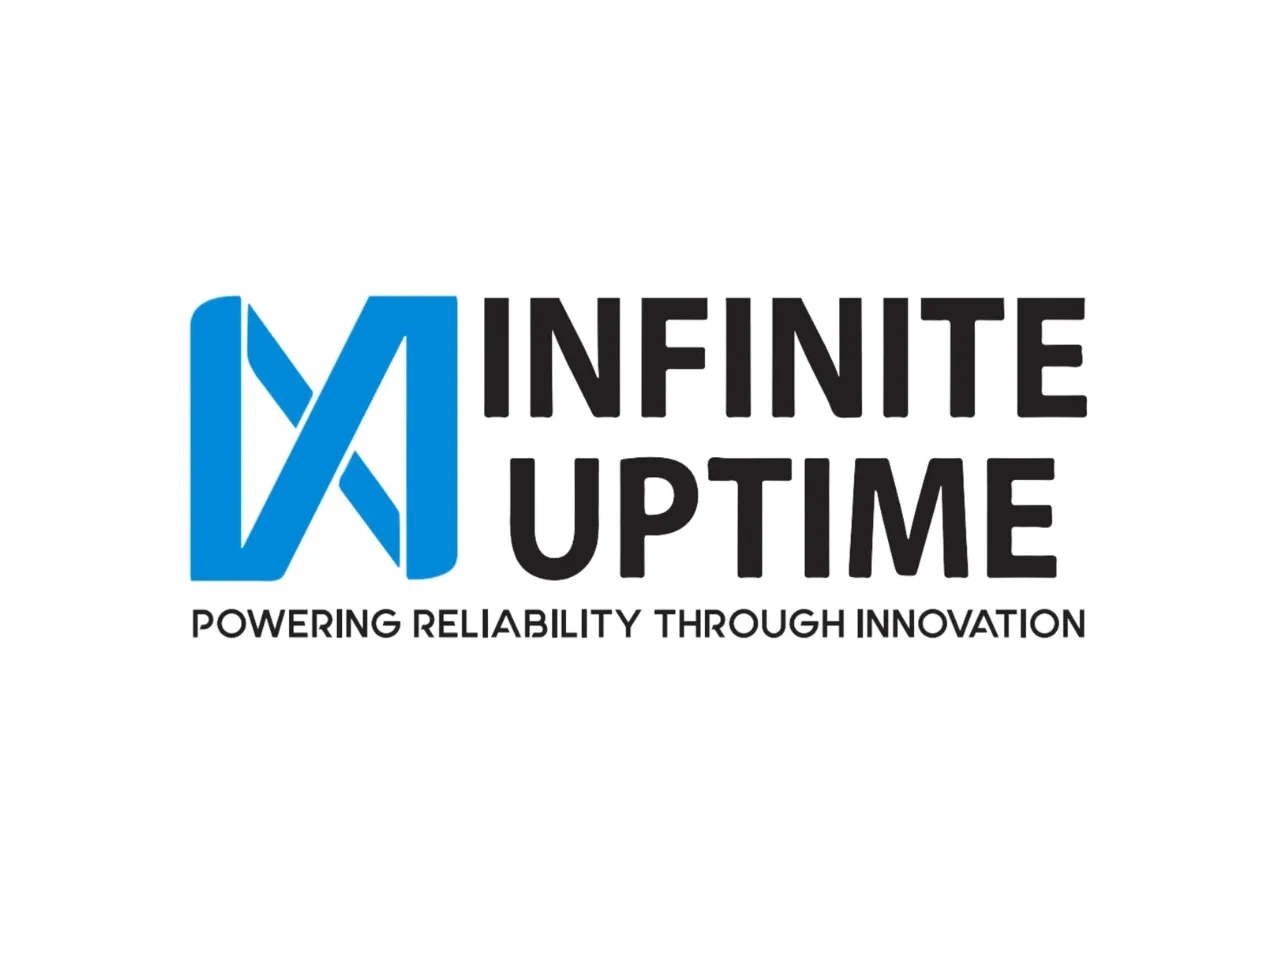 Industrial IoT startup Infinite Uptime raises $18.85M in funding from Tiger Global